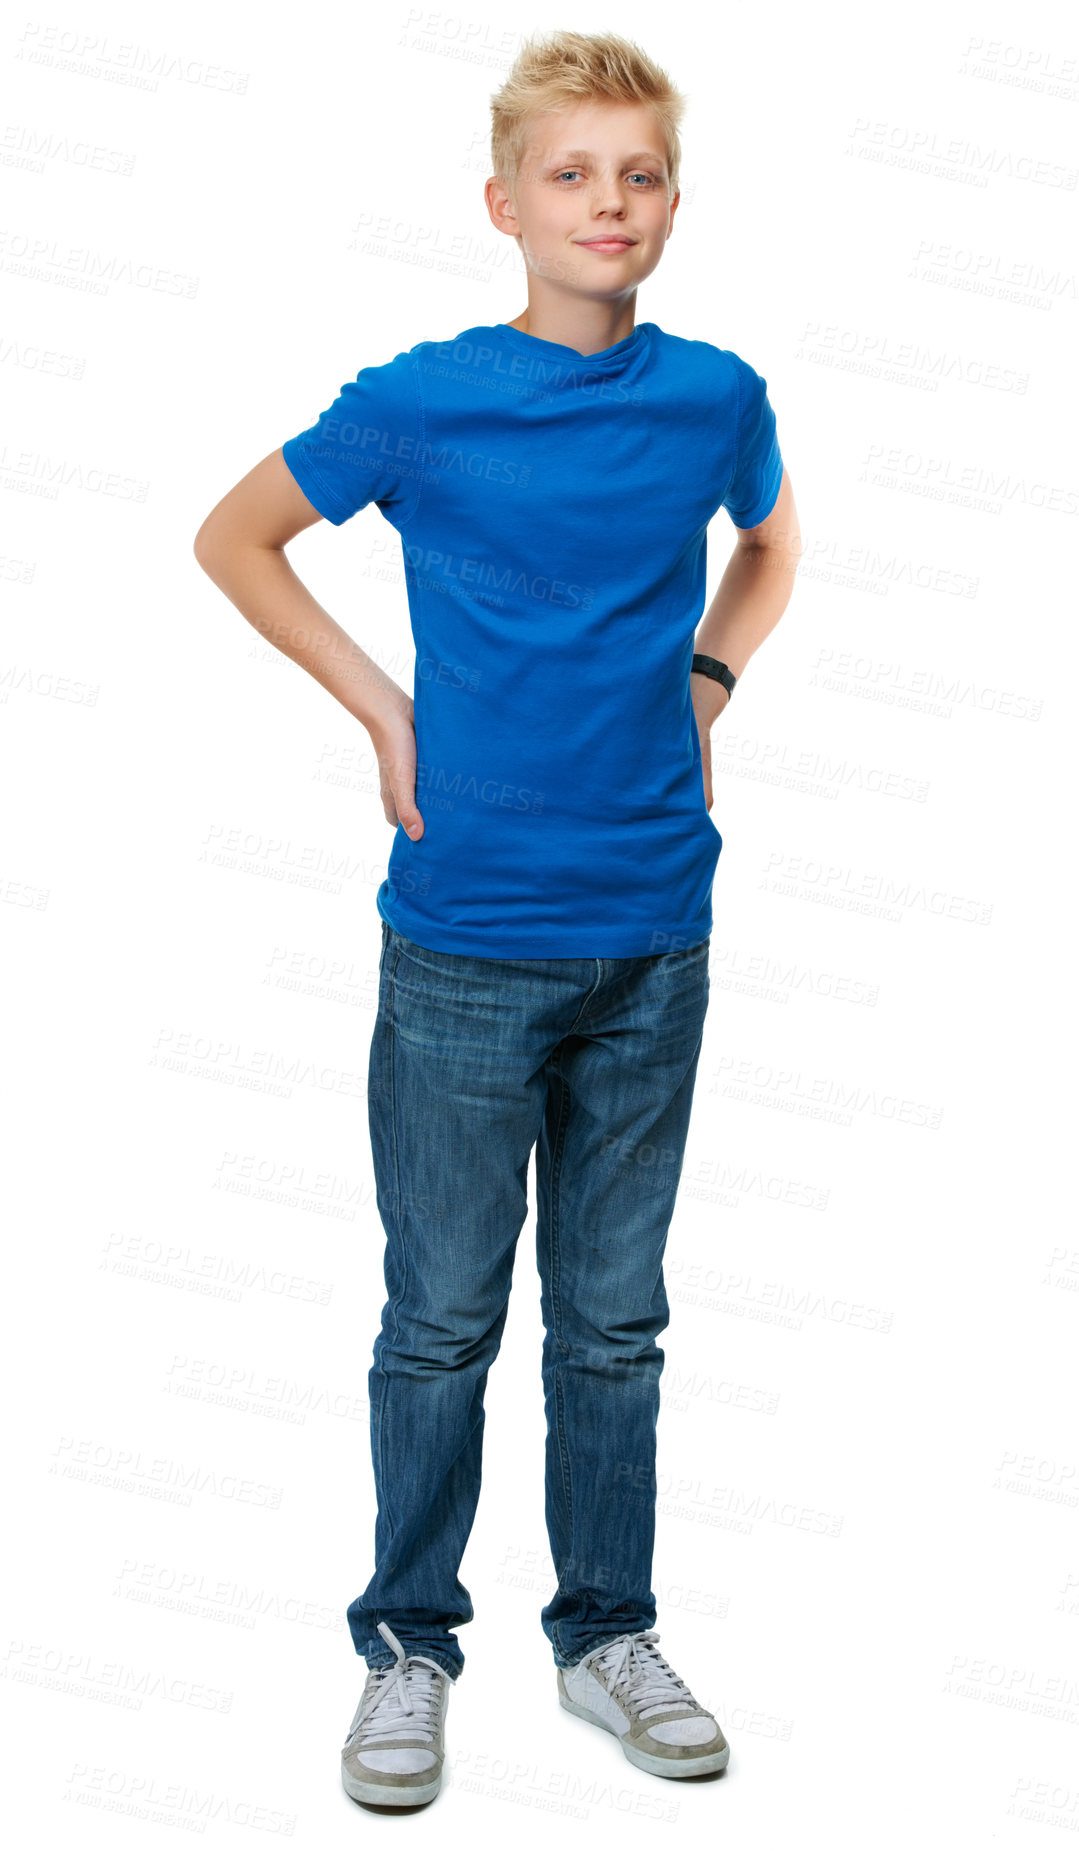 Buy stock photo Full-length studio portrait of a blond teenage boy against a white background